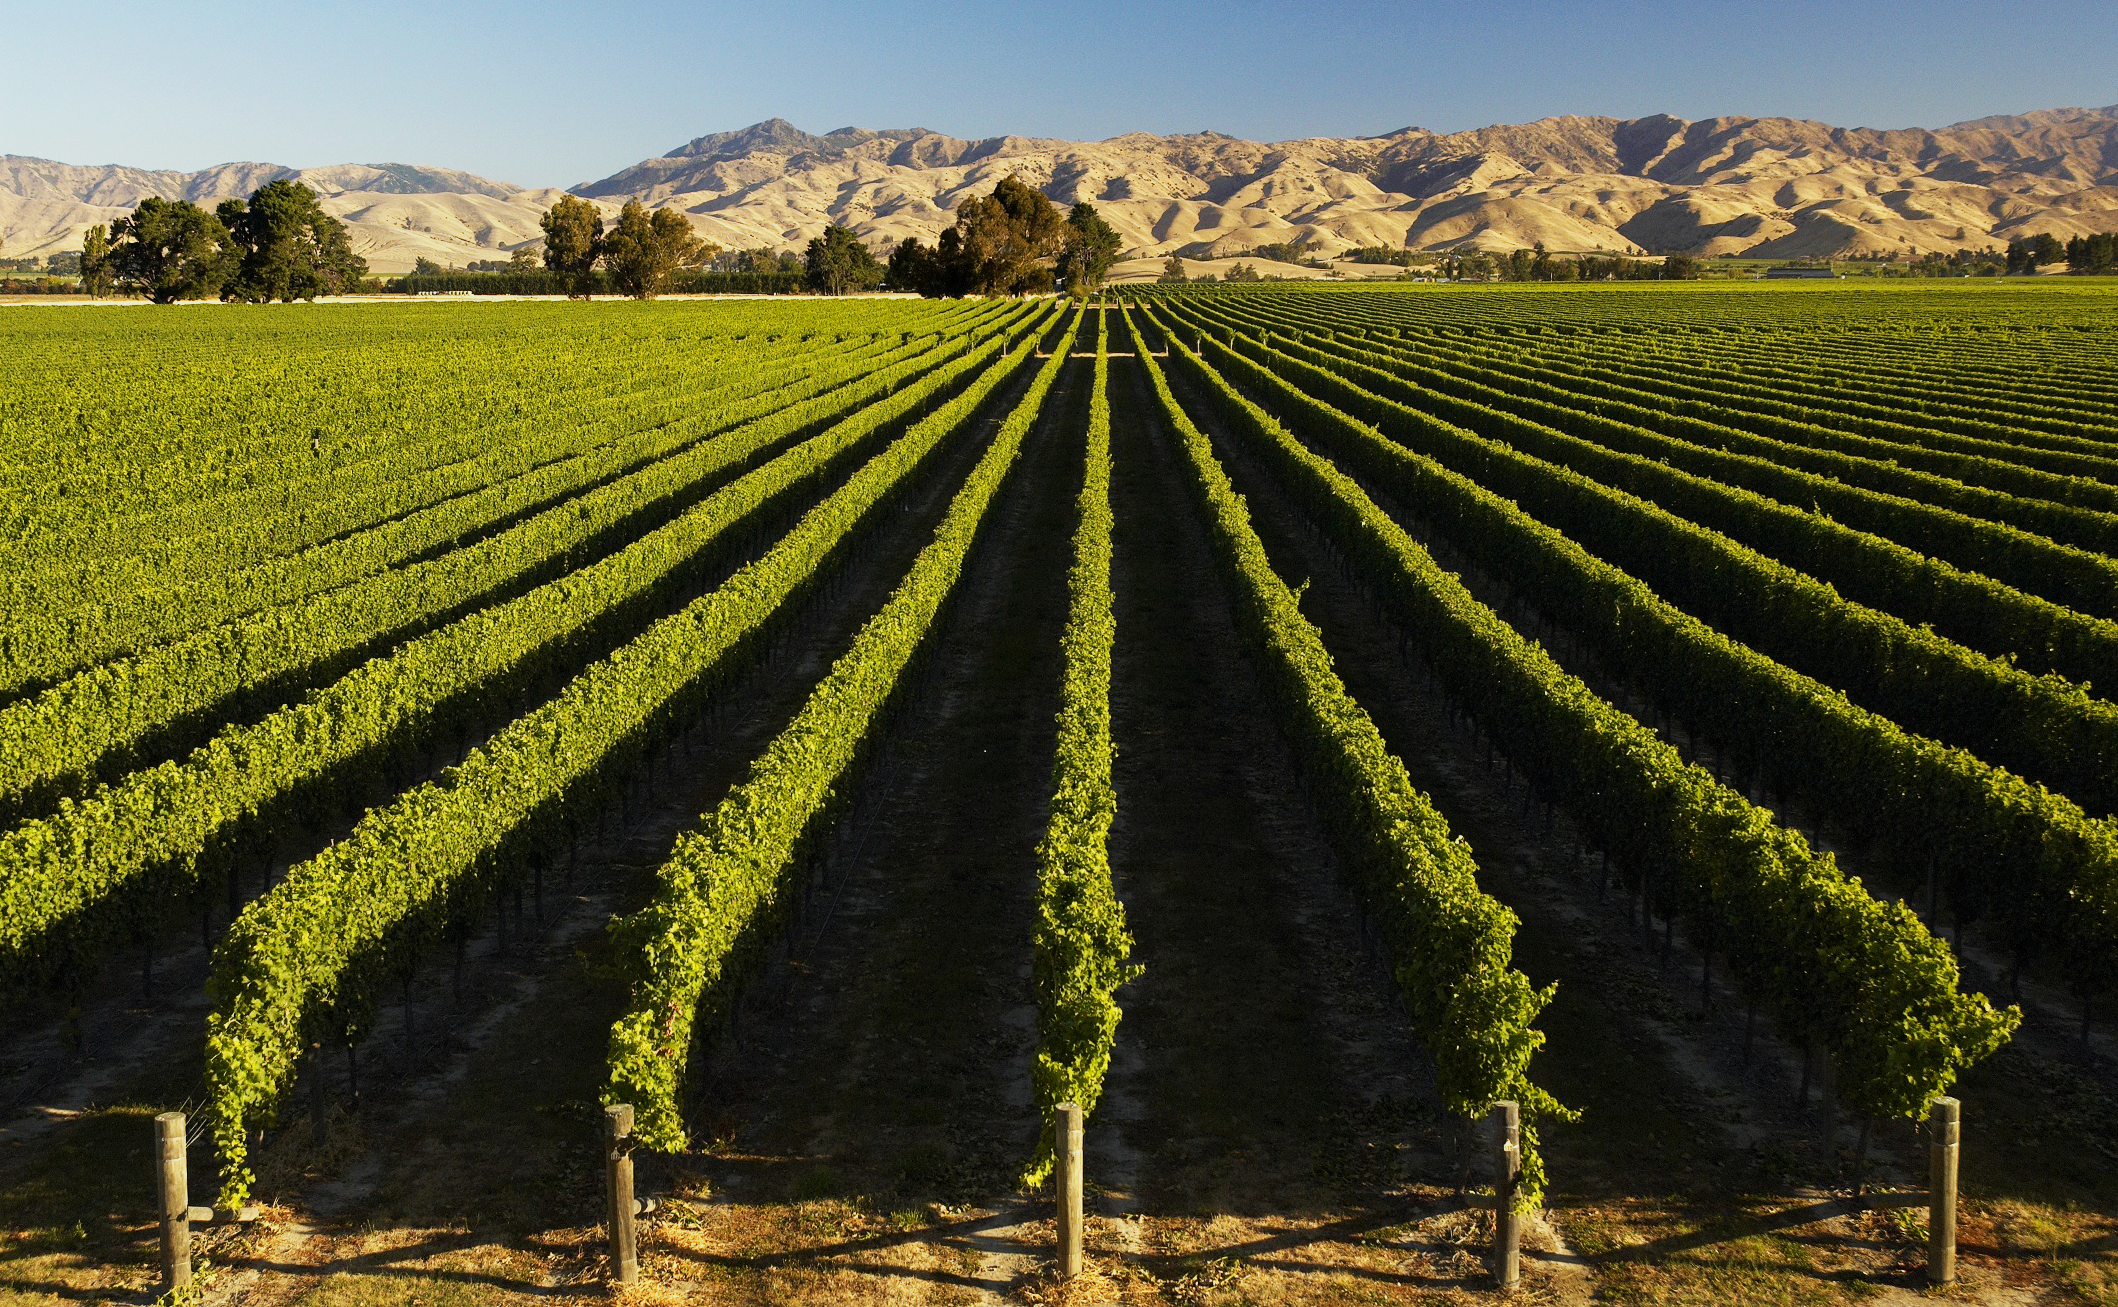 Image of a vineyard in New Zealand